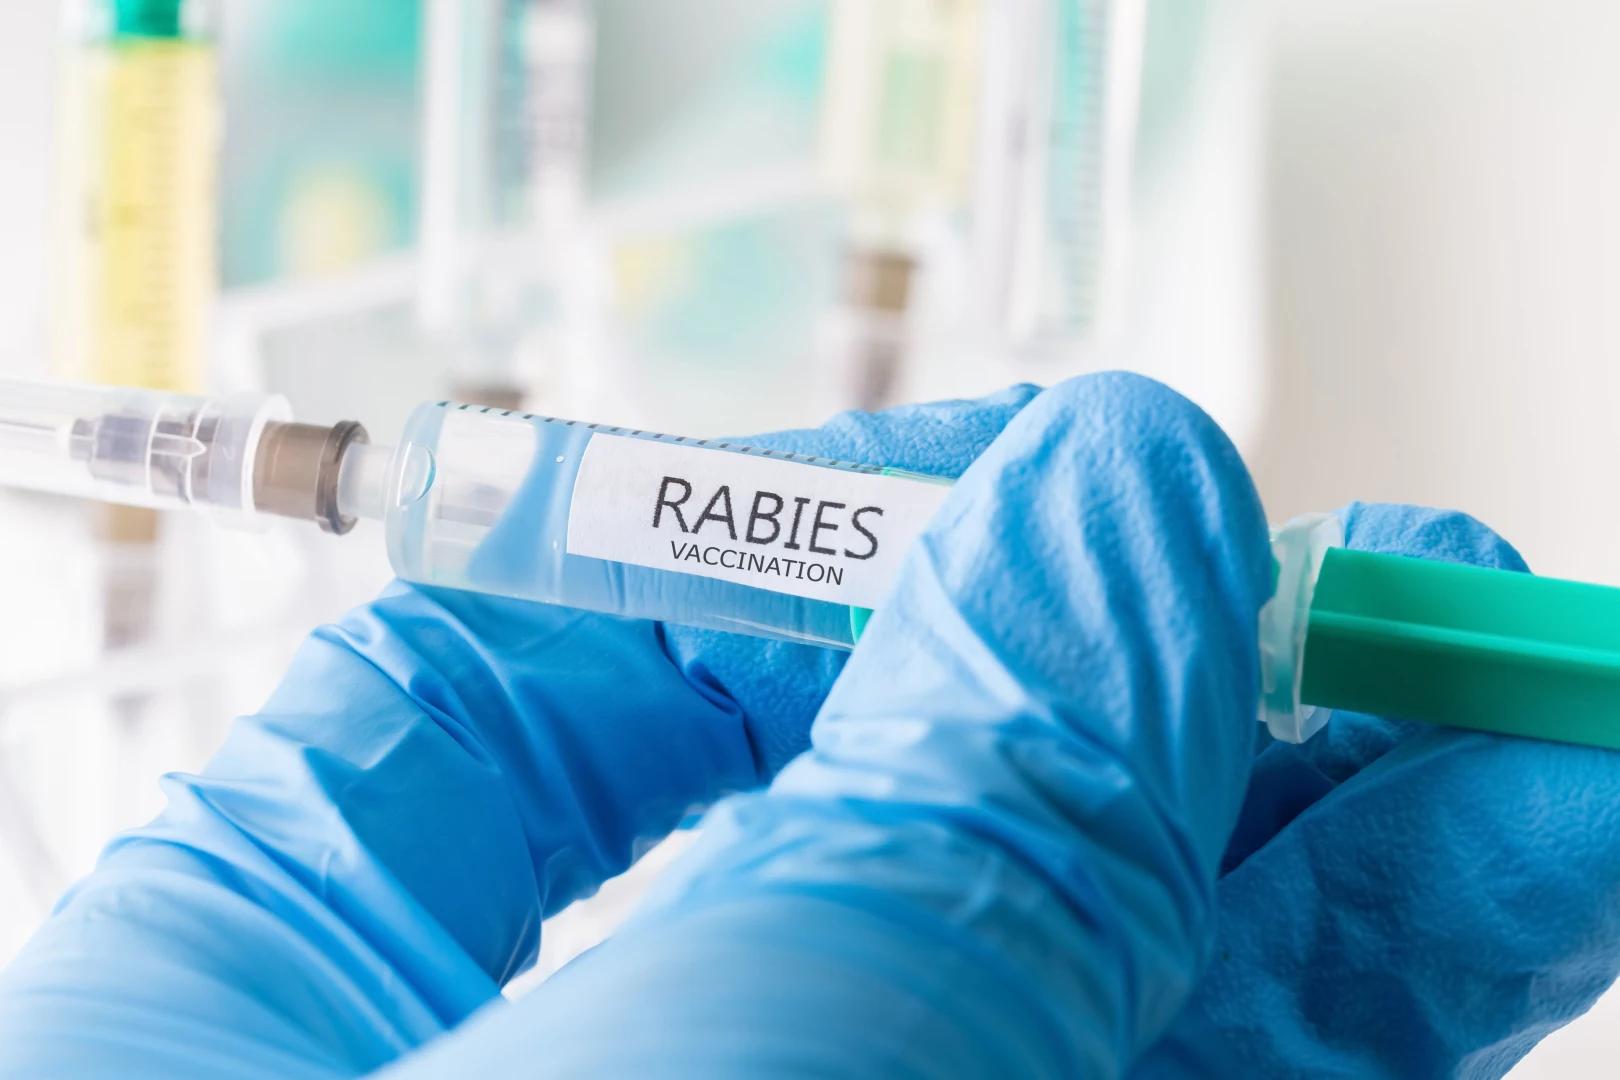 Israel government investigating rabies vaccine for animals after 10 adverse events